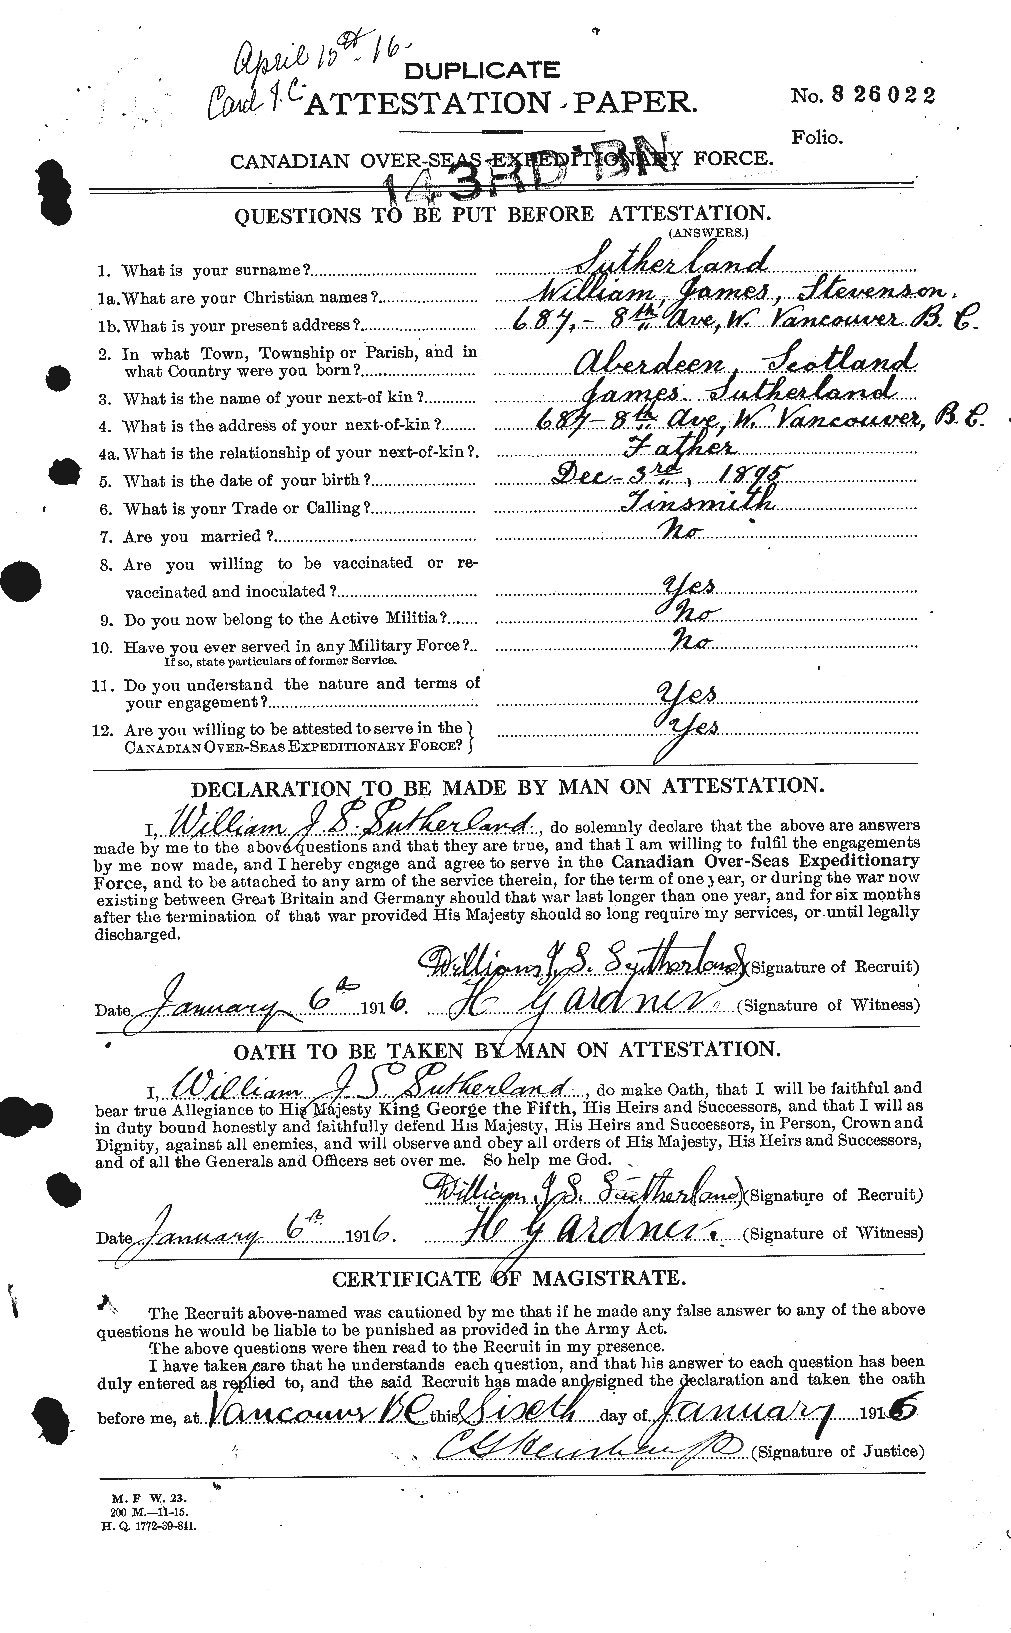 Personnel Records of the First World War - CEF 126421a